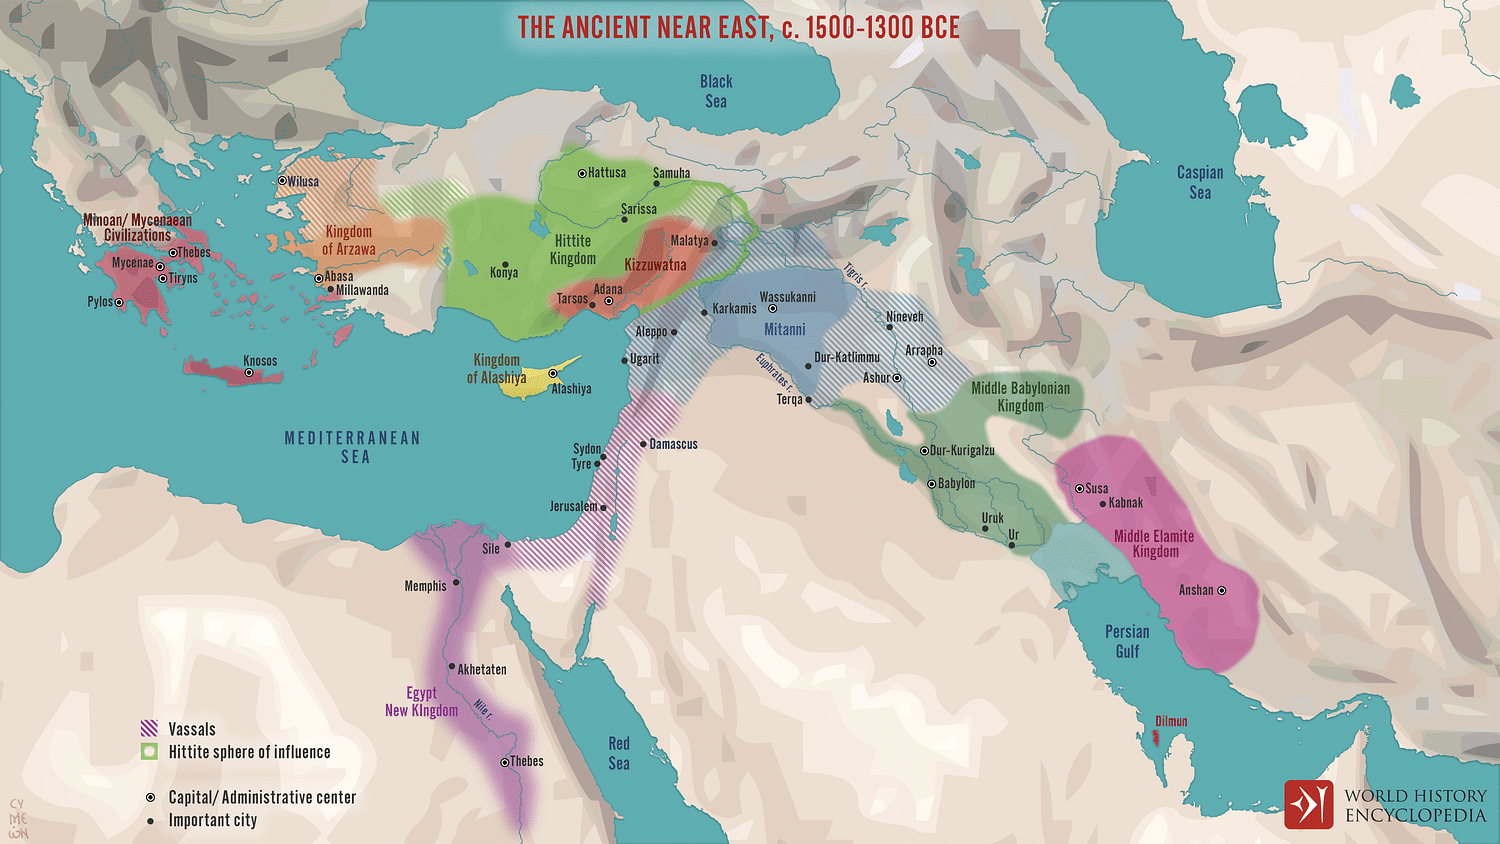 Race and Ethnicity in the Ancient Mediterranean World: Methods